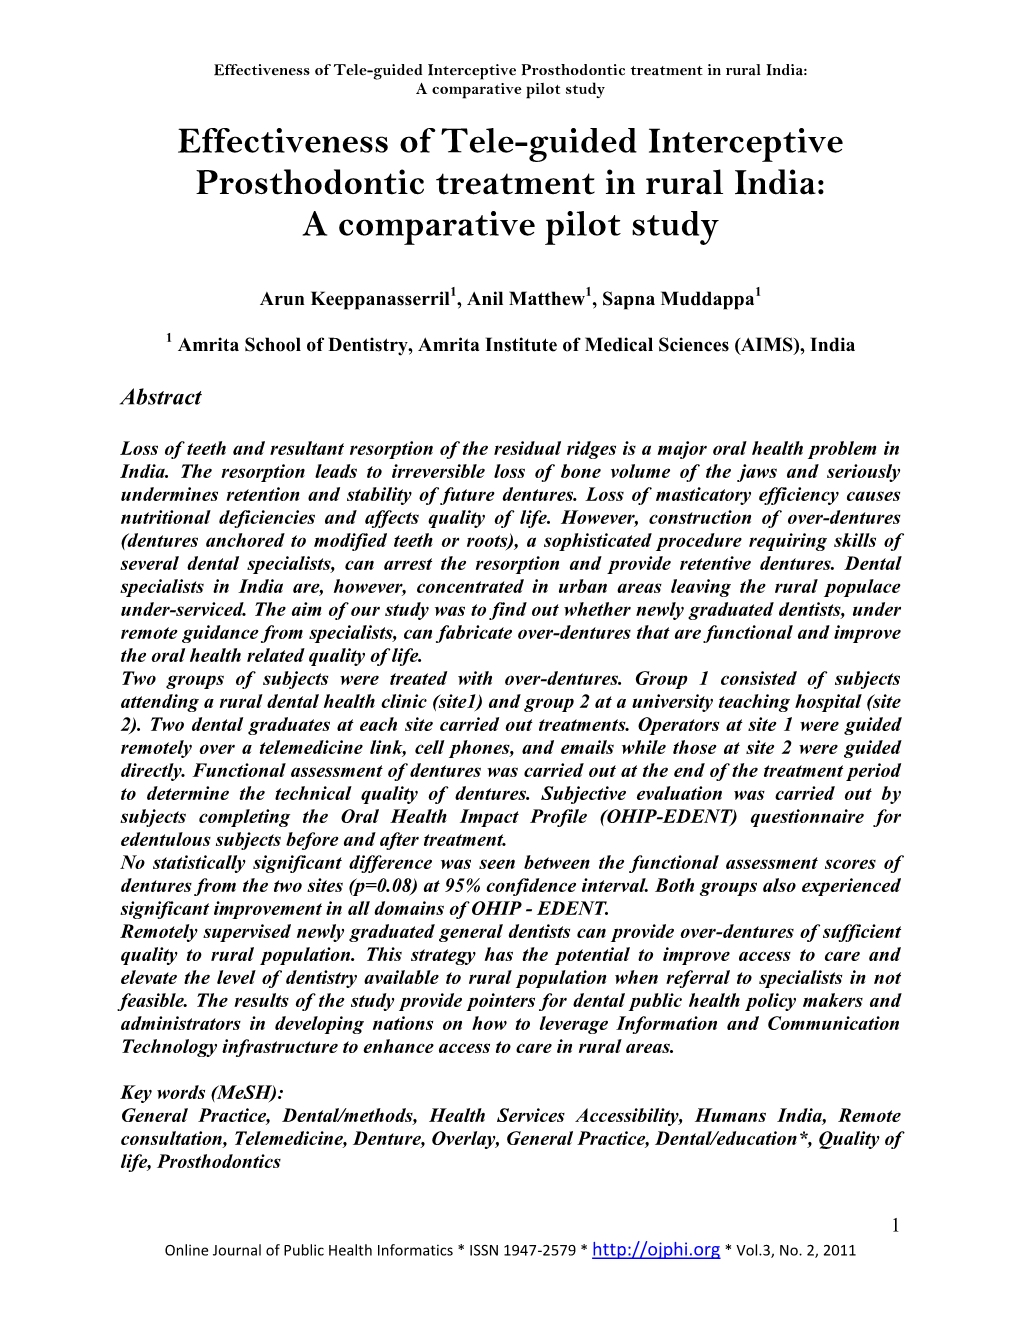 Effectiveness of Tele-Guided Interceptive Prosthodontic Treatment in Rural India: a Comparative Pilot Study